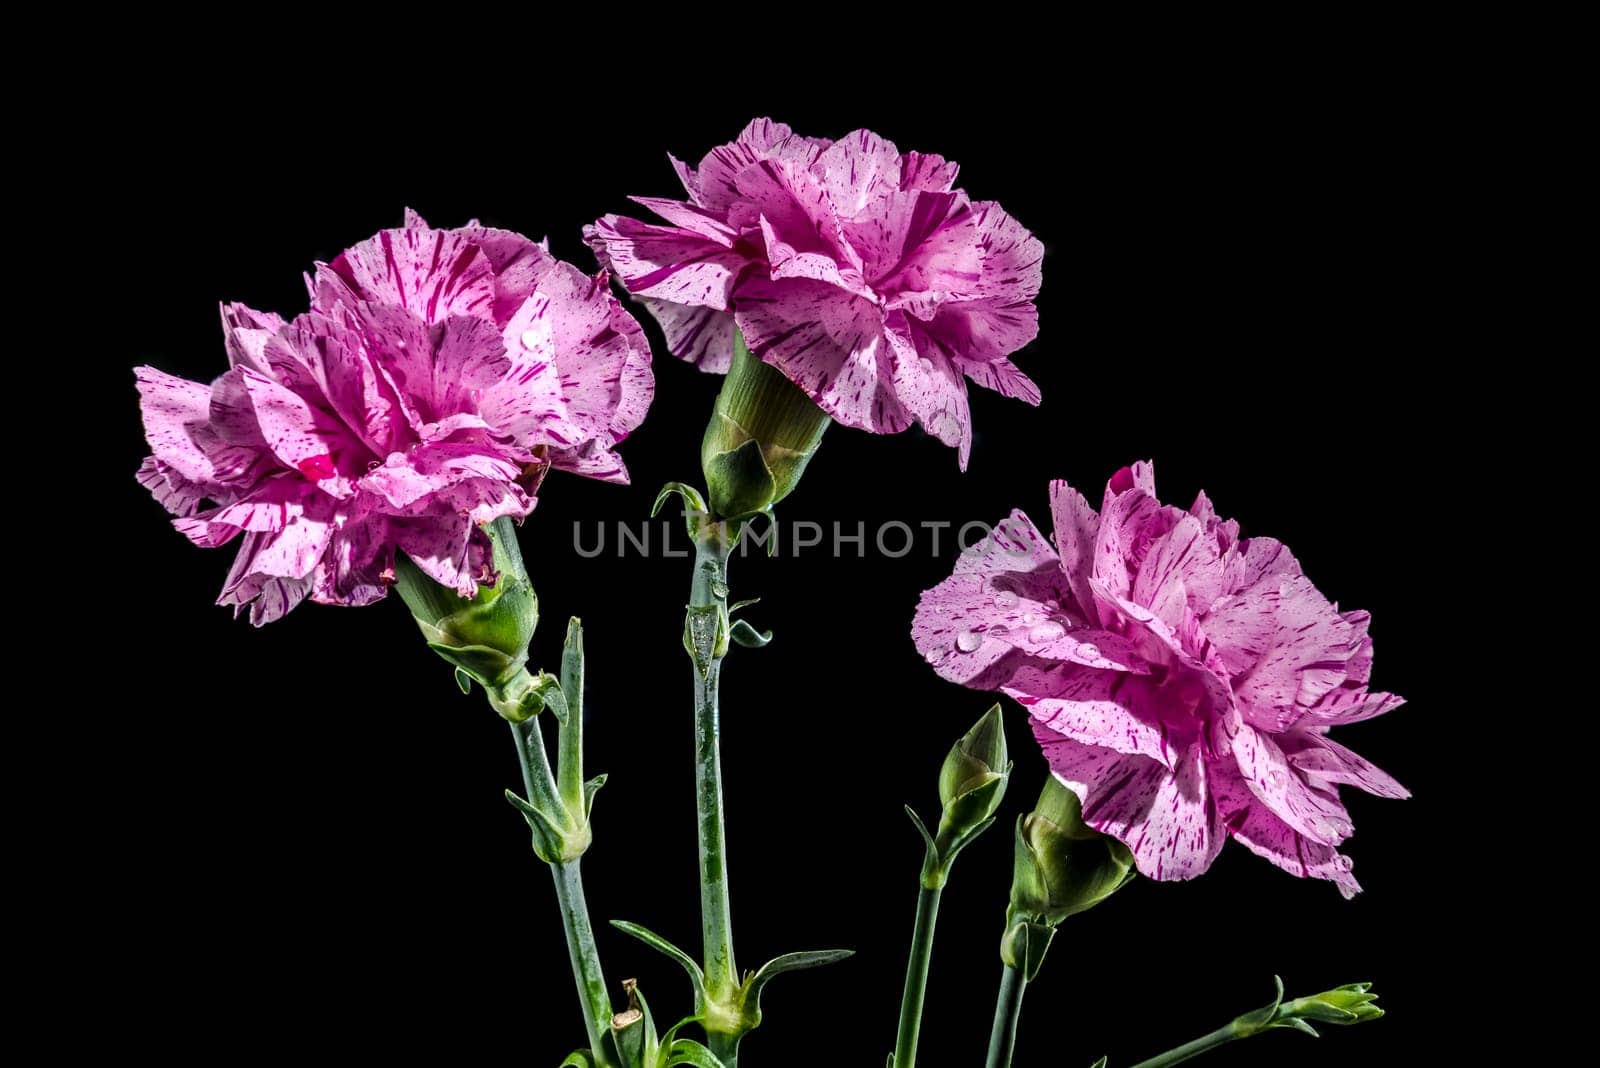 Beautiful blooming Pink carnations flowers isolated on a black background. Flower head close-up.